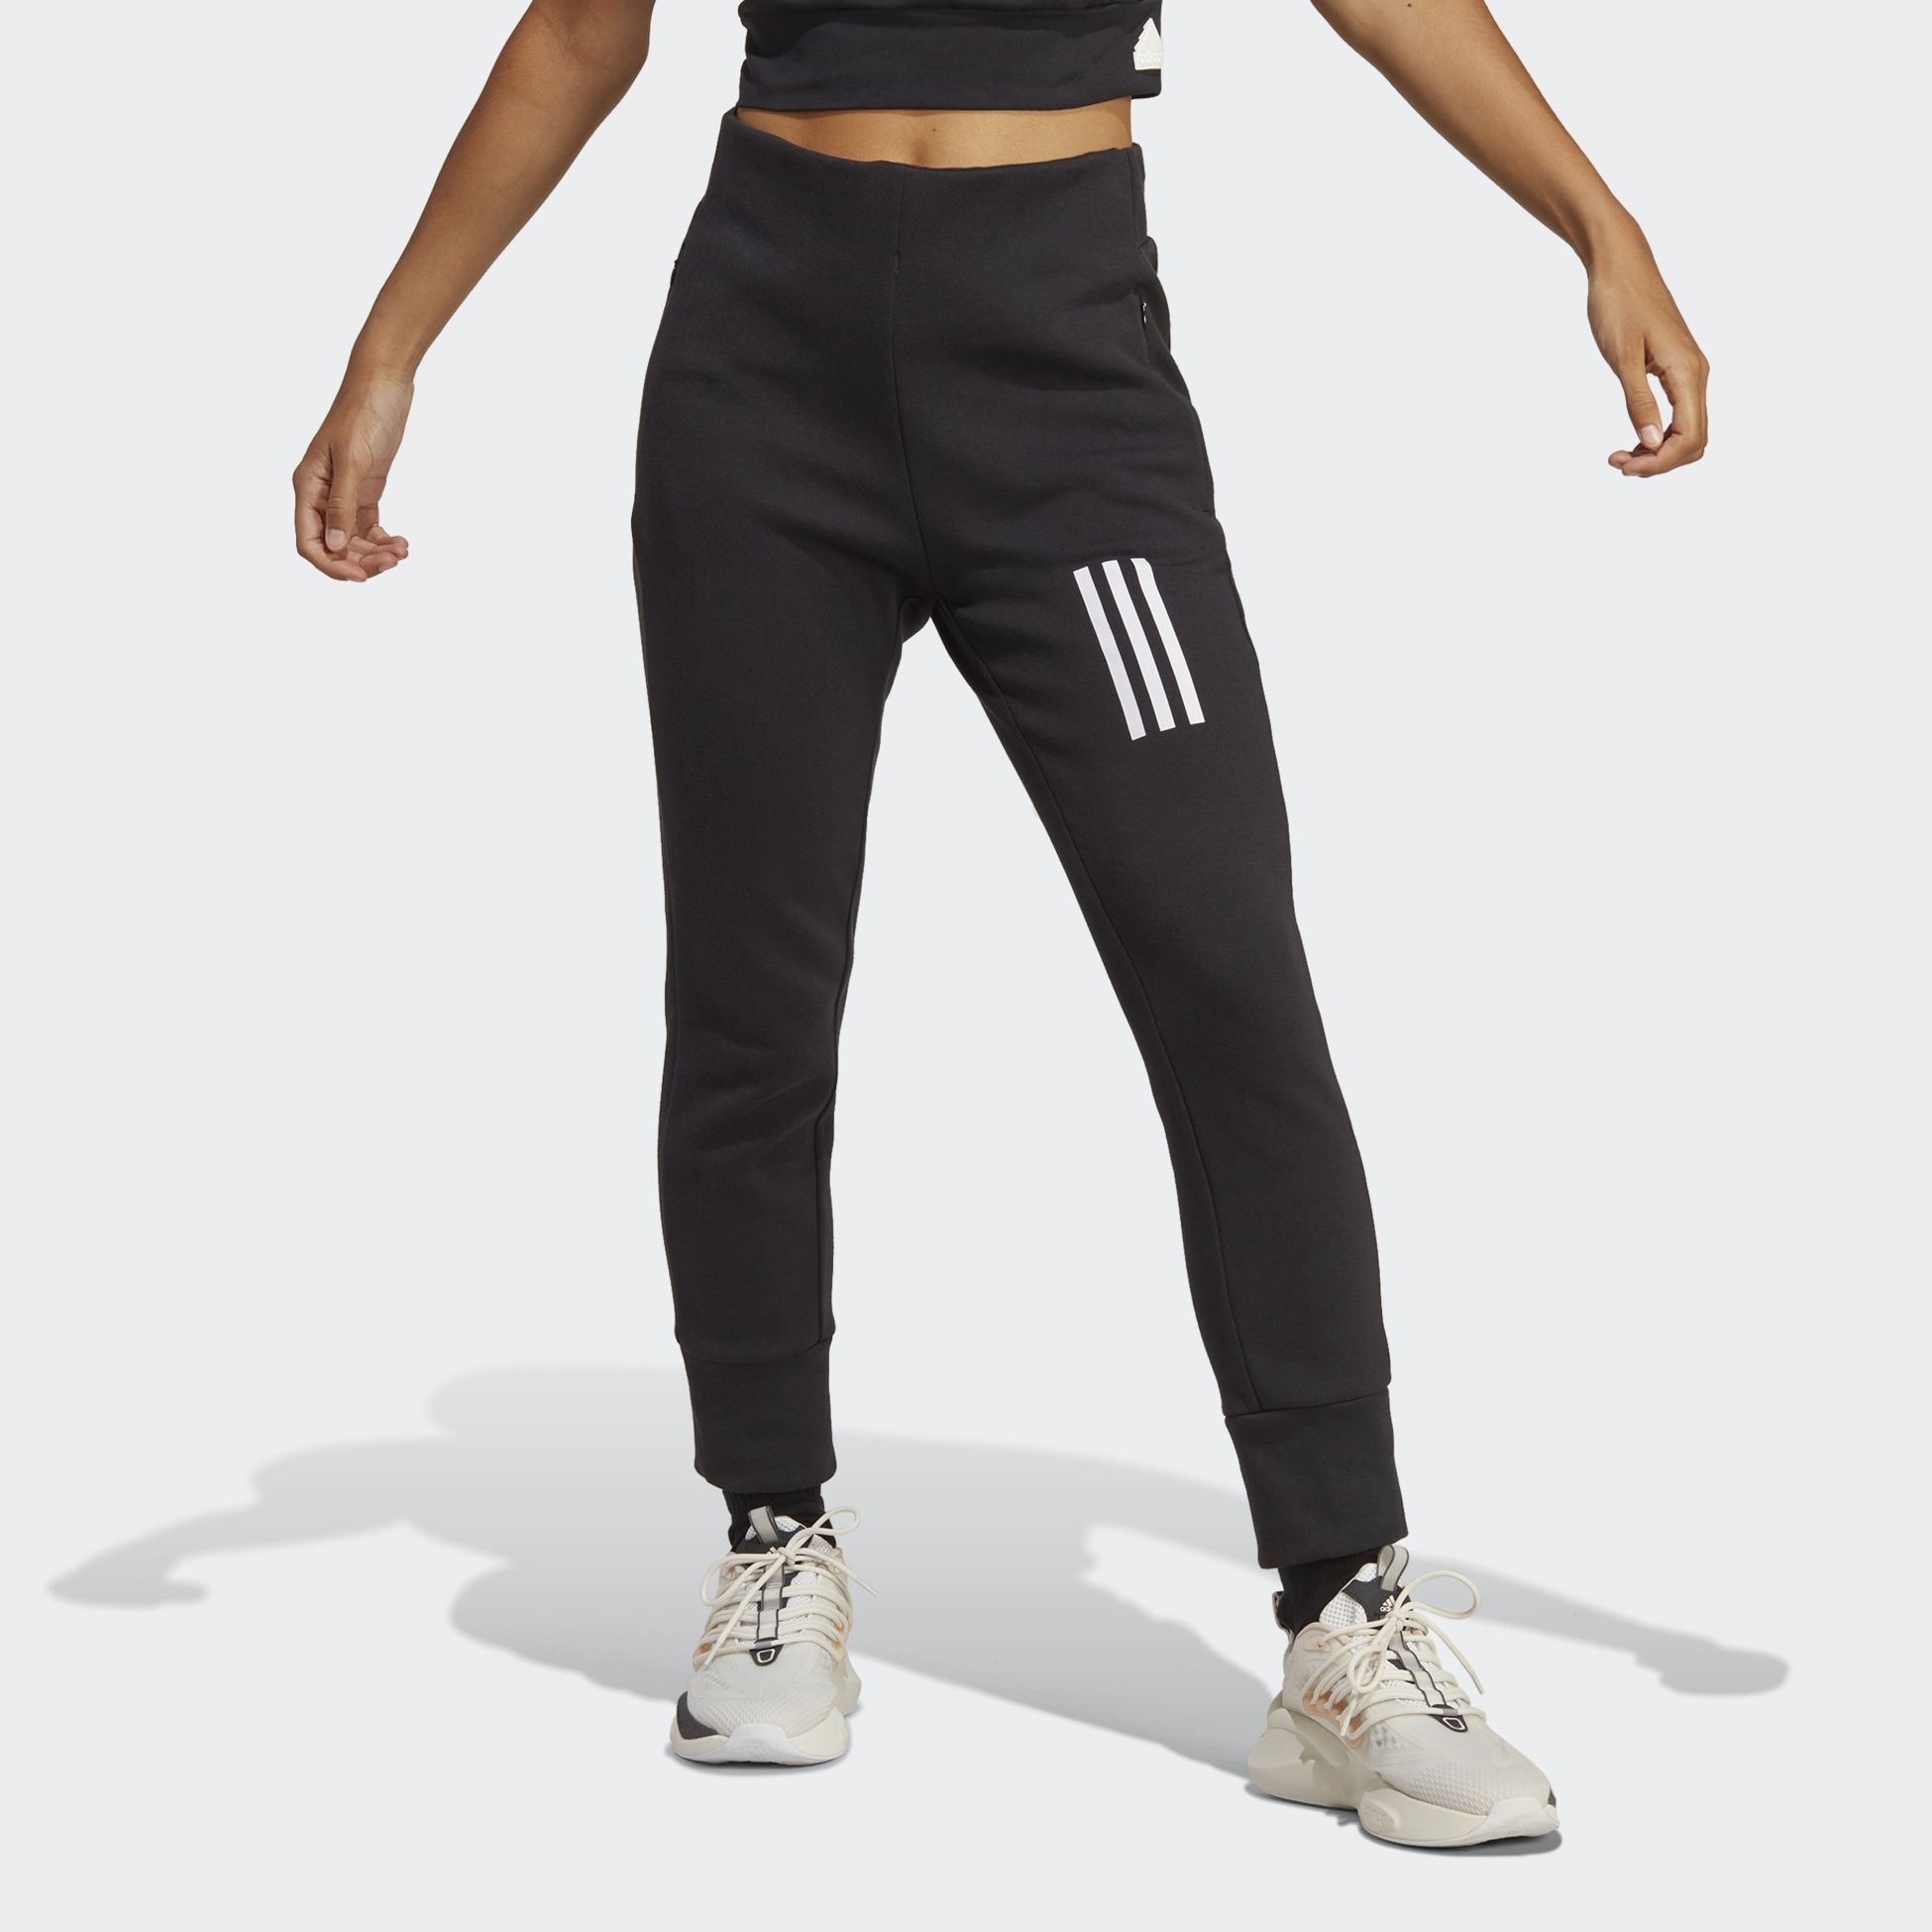 ADIDAS, Mission Victory High-Waist 7/8 Tracksuit Bottoms